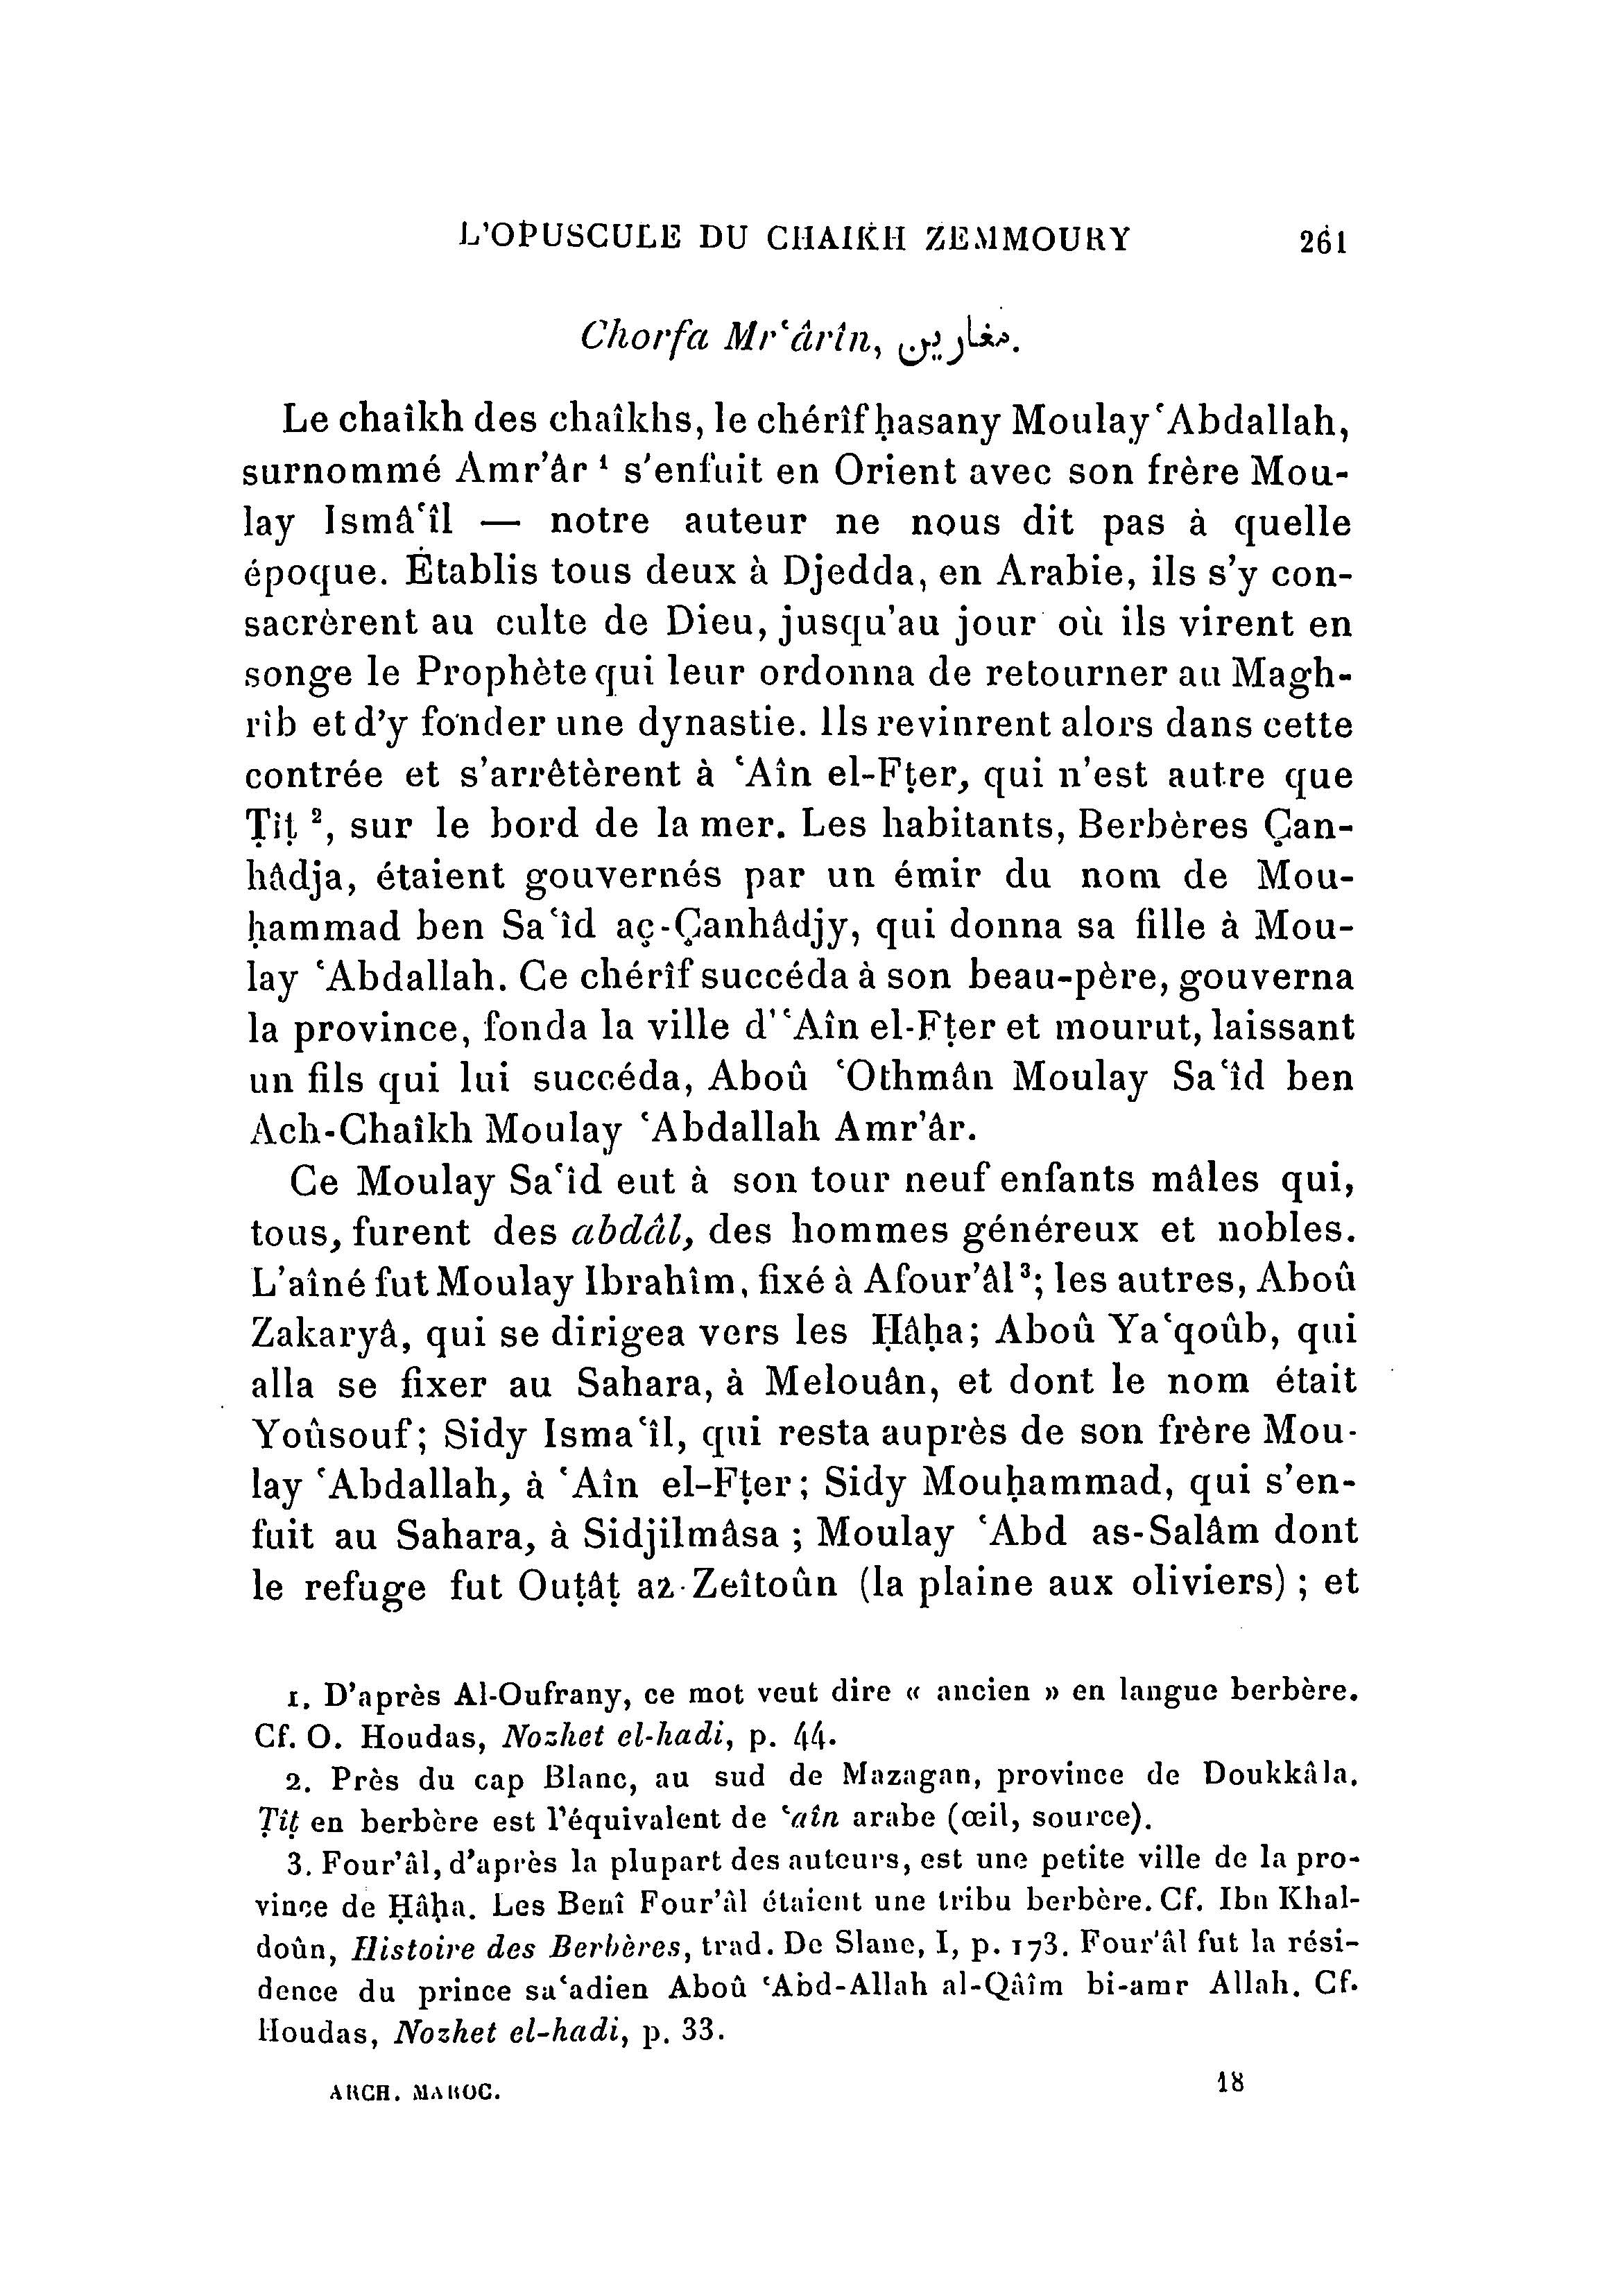 archives_marocaines-vol-2_1_page_436